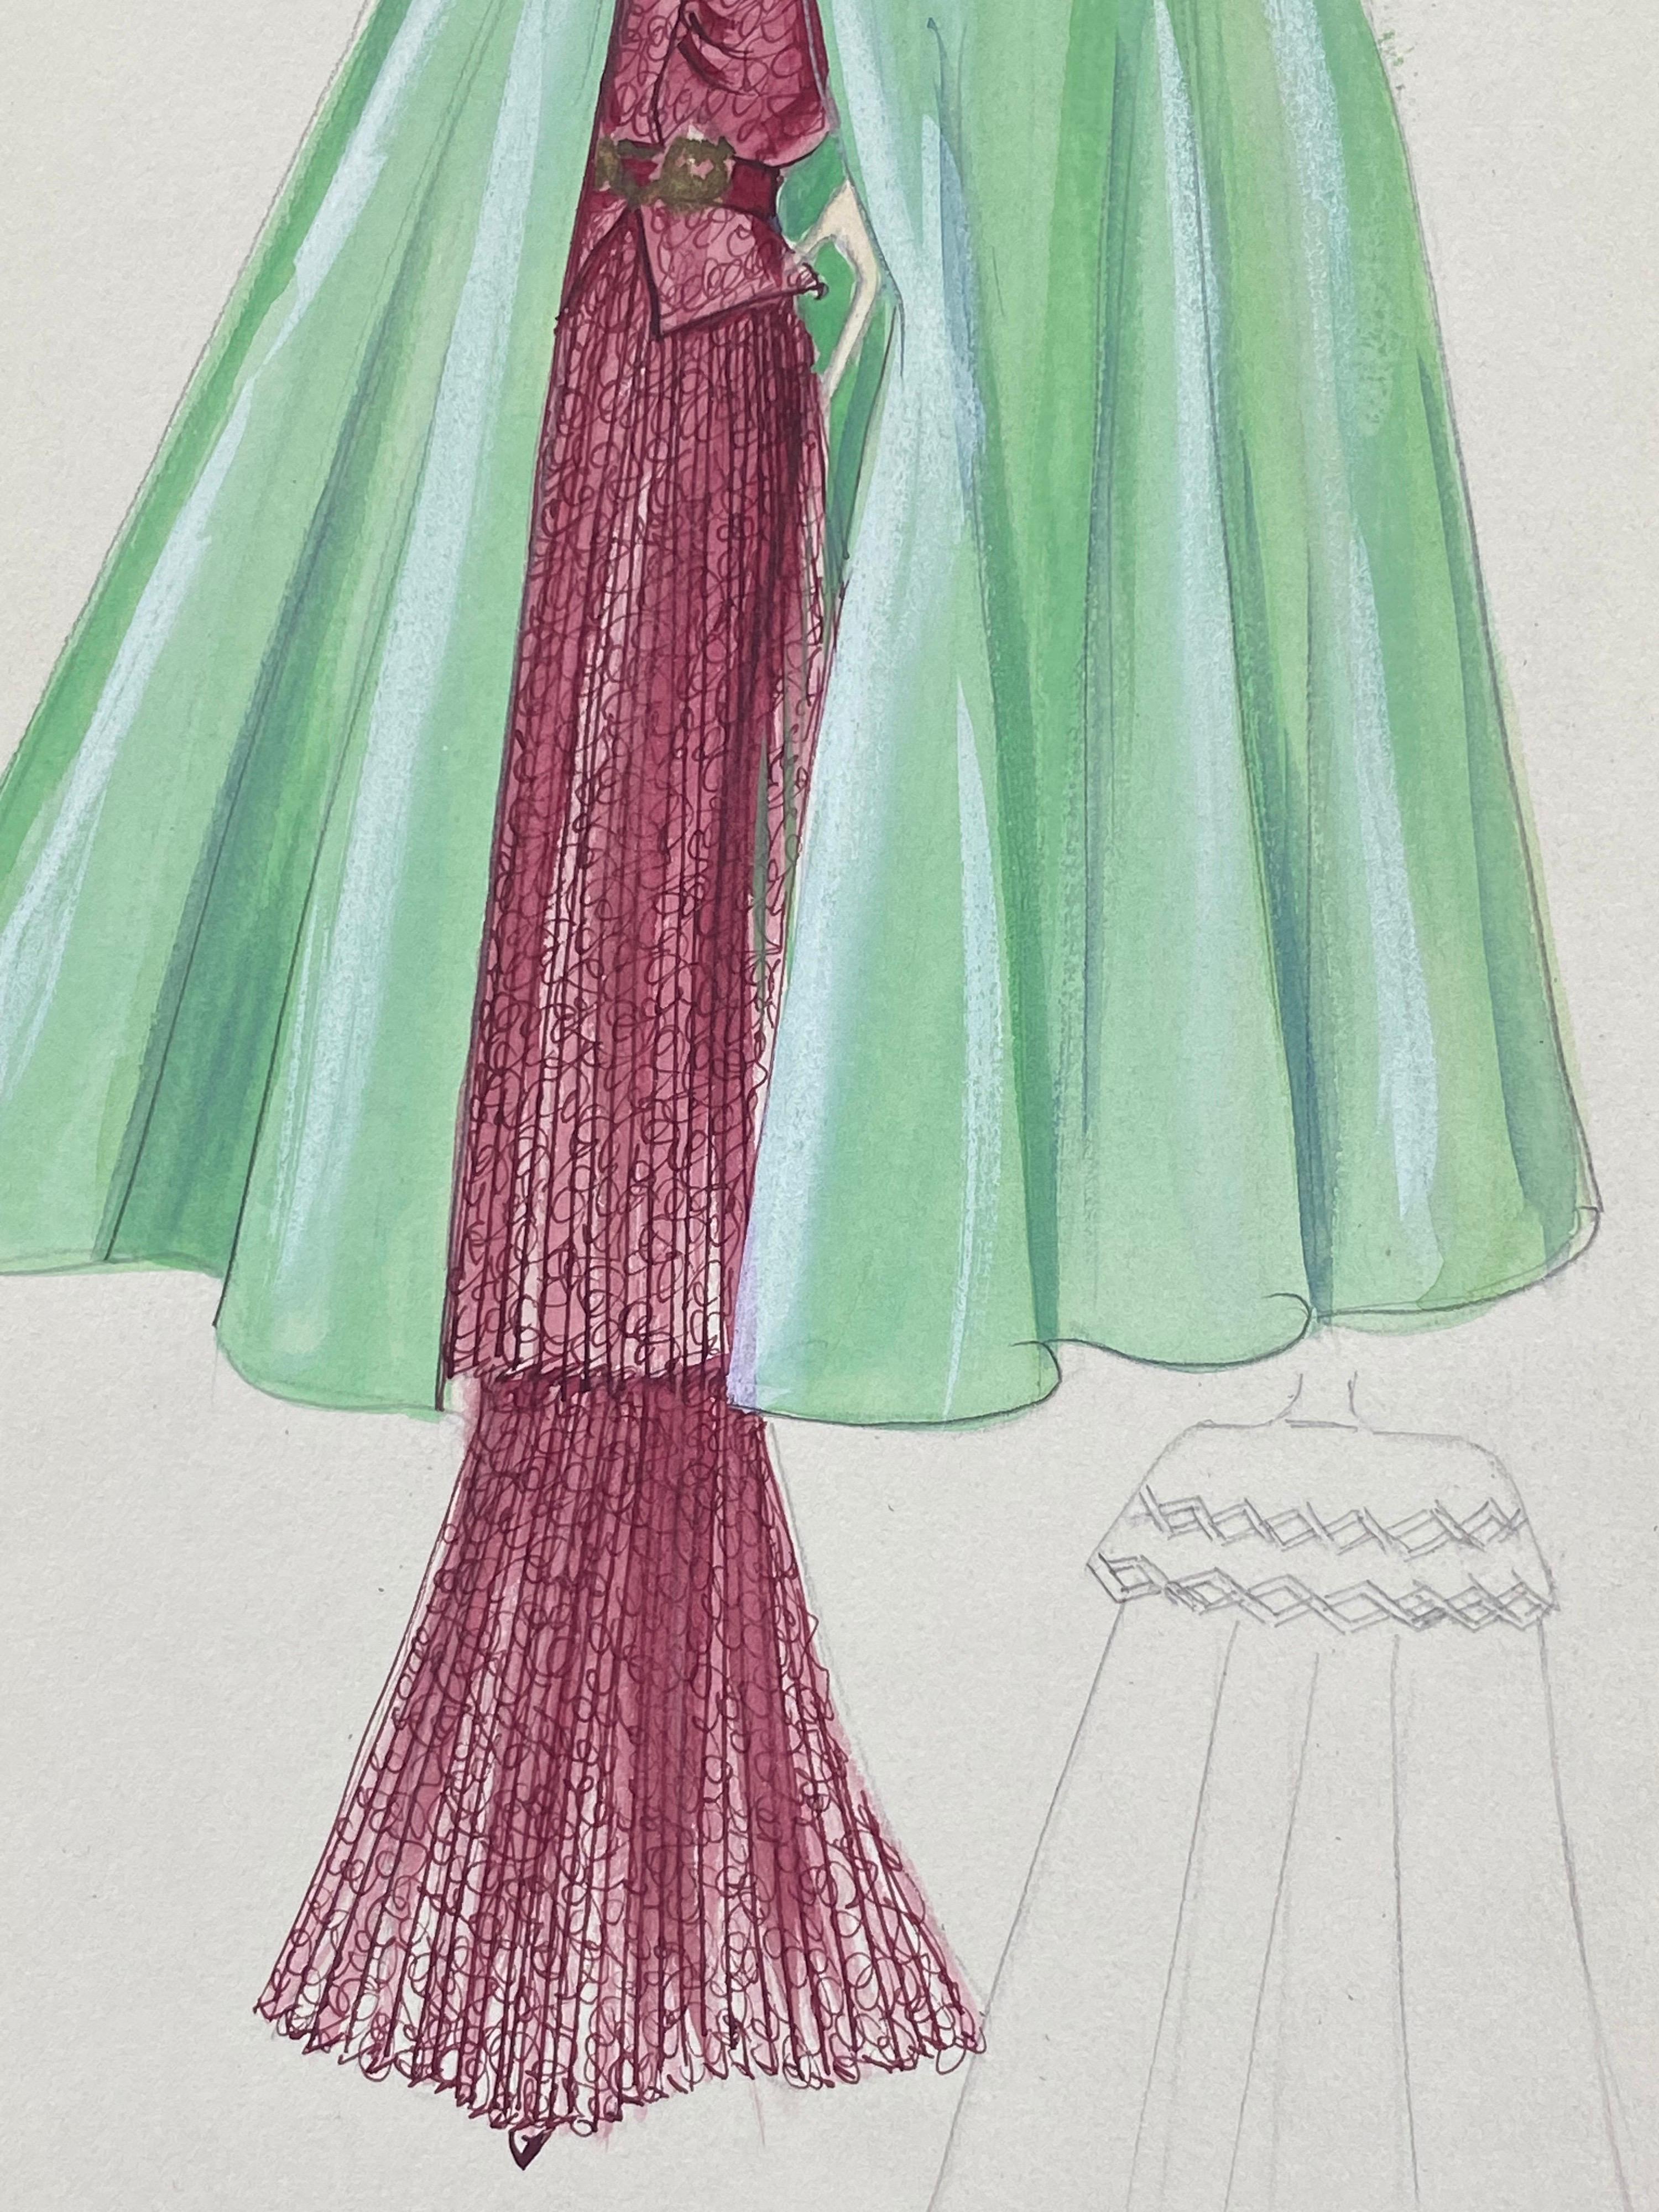 1930's Original Parisian Fashion Watercolor Burgandy Dress with Green Cape In Good Condition For Sale In Cirencester, GB